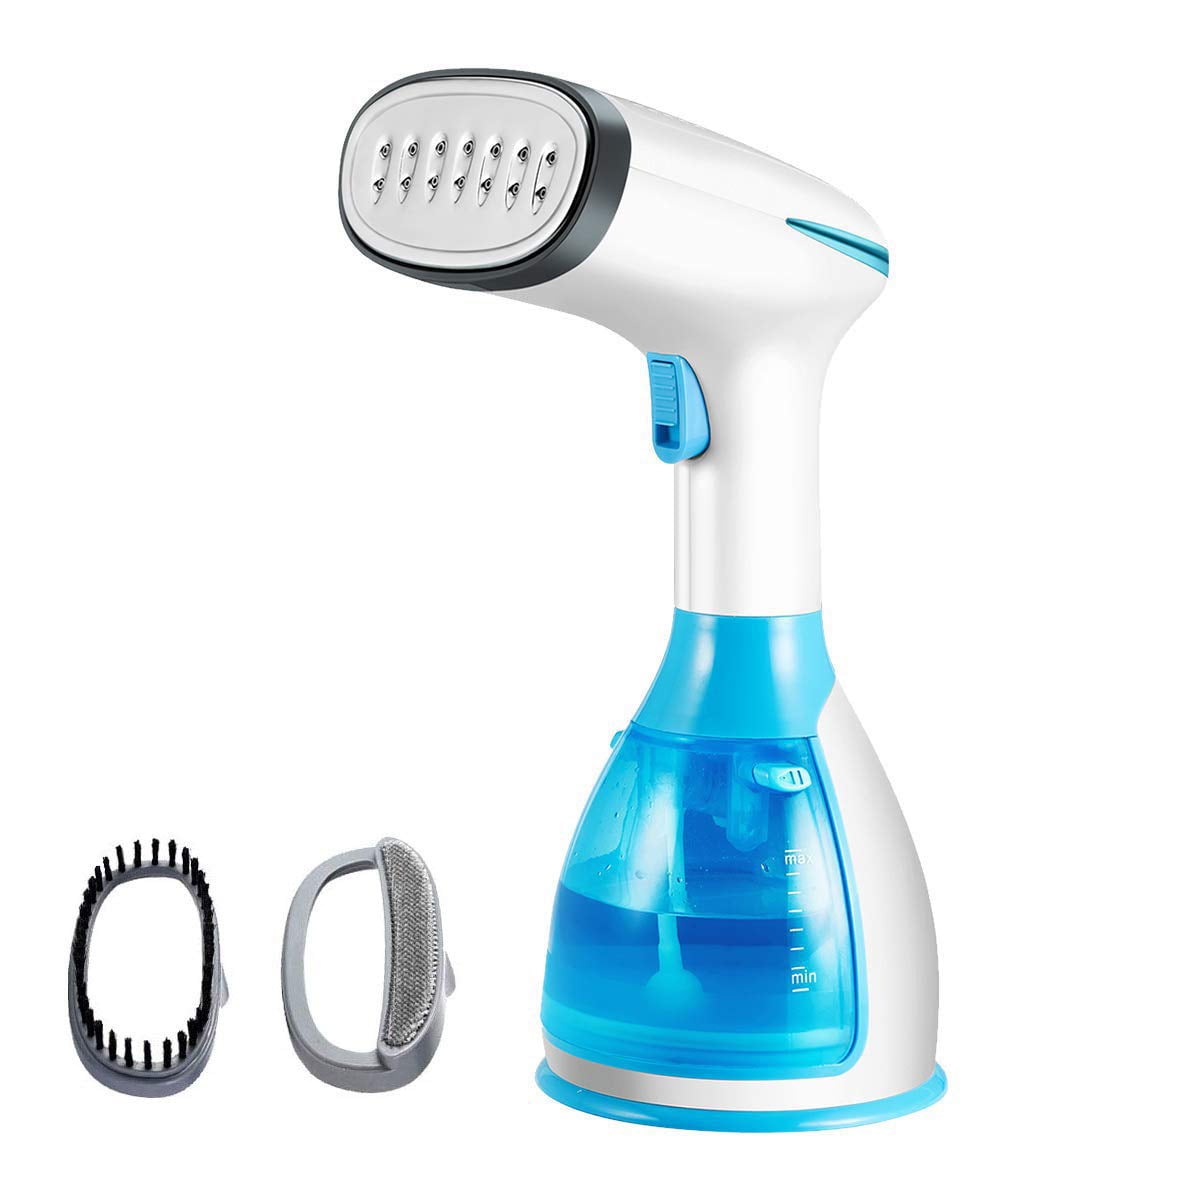 Details about   Handheld Garment Clothes Steamer Wrinkle Remover Portable Dry Steam Iron Green 